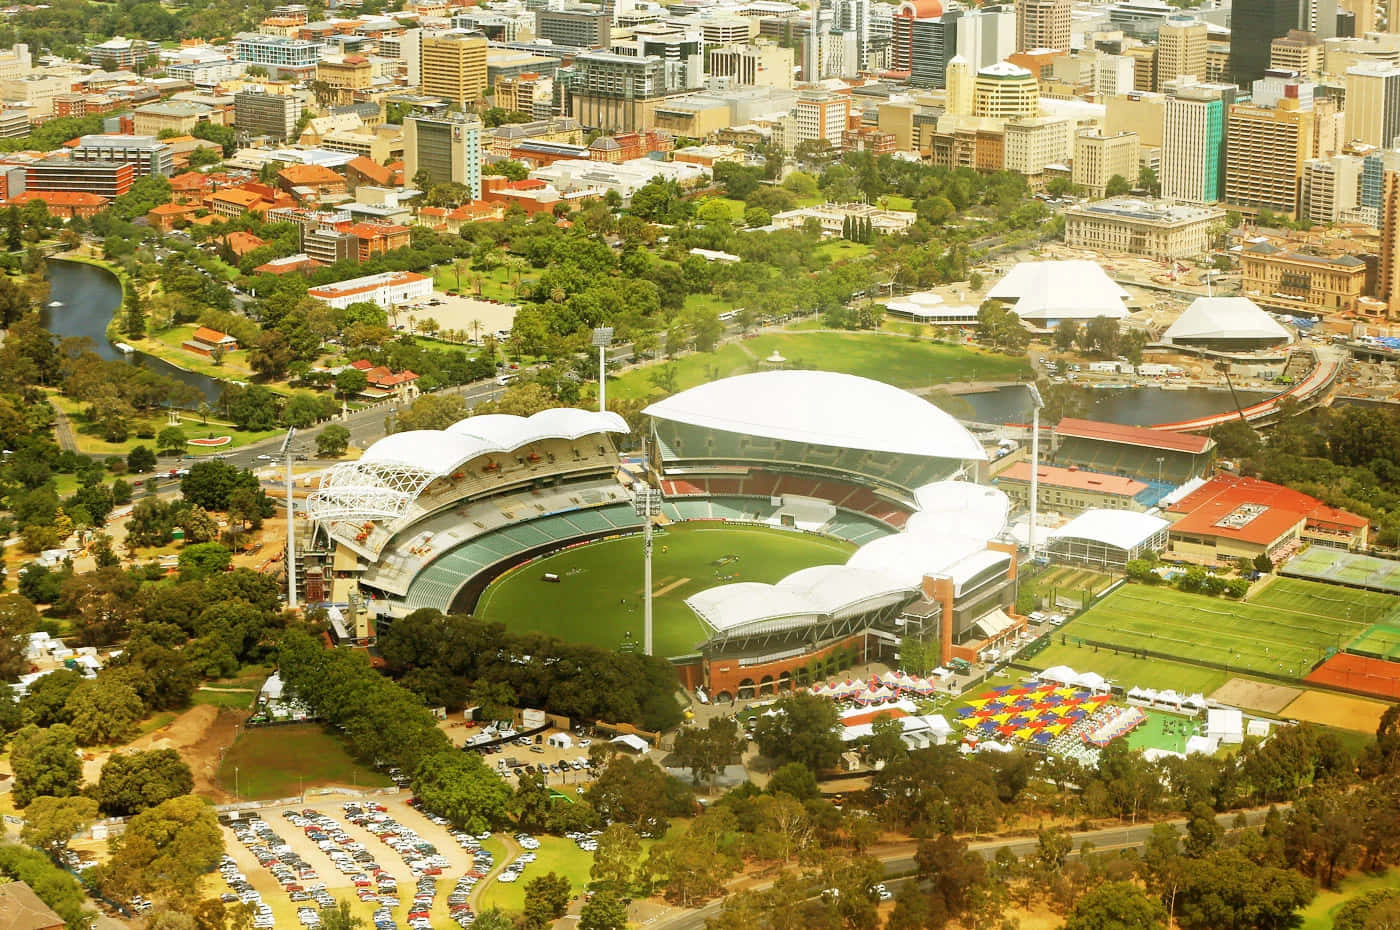 Adelaide Oval Aerial View Wallpaper